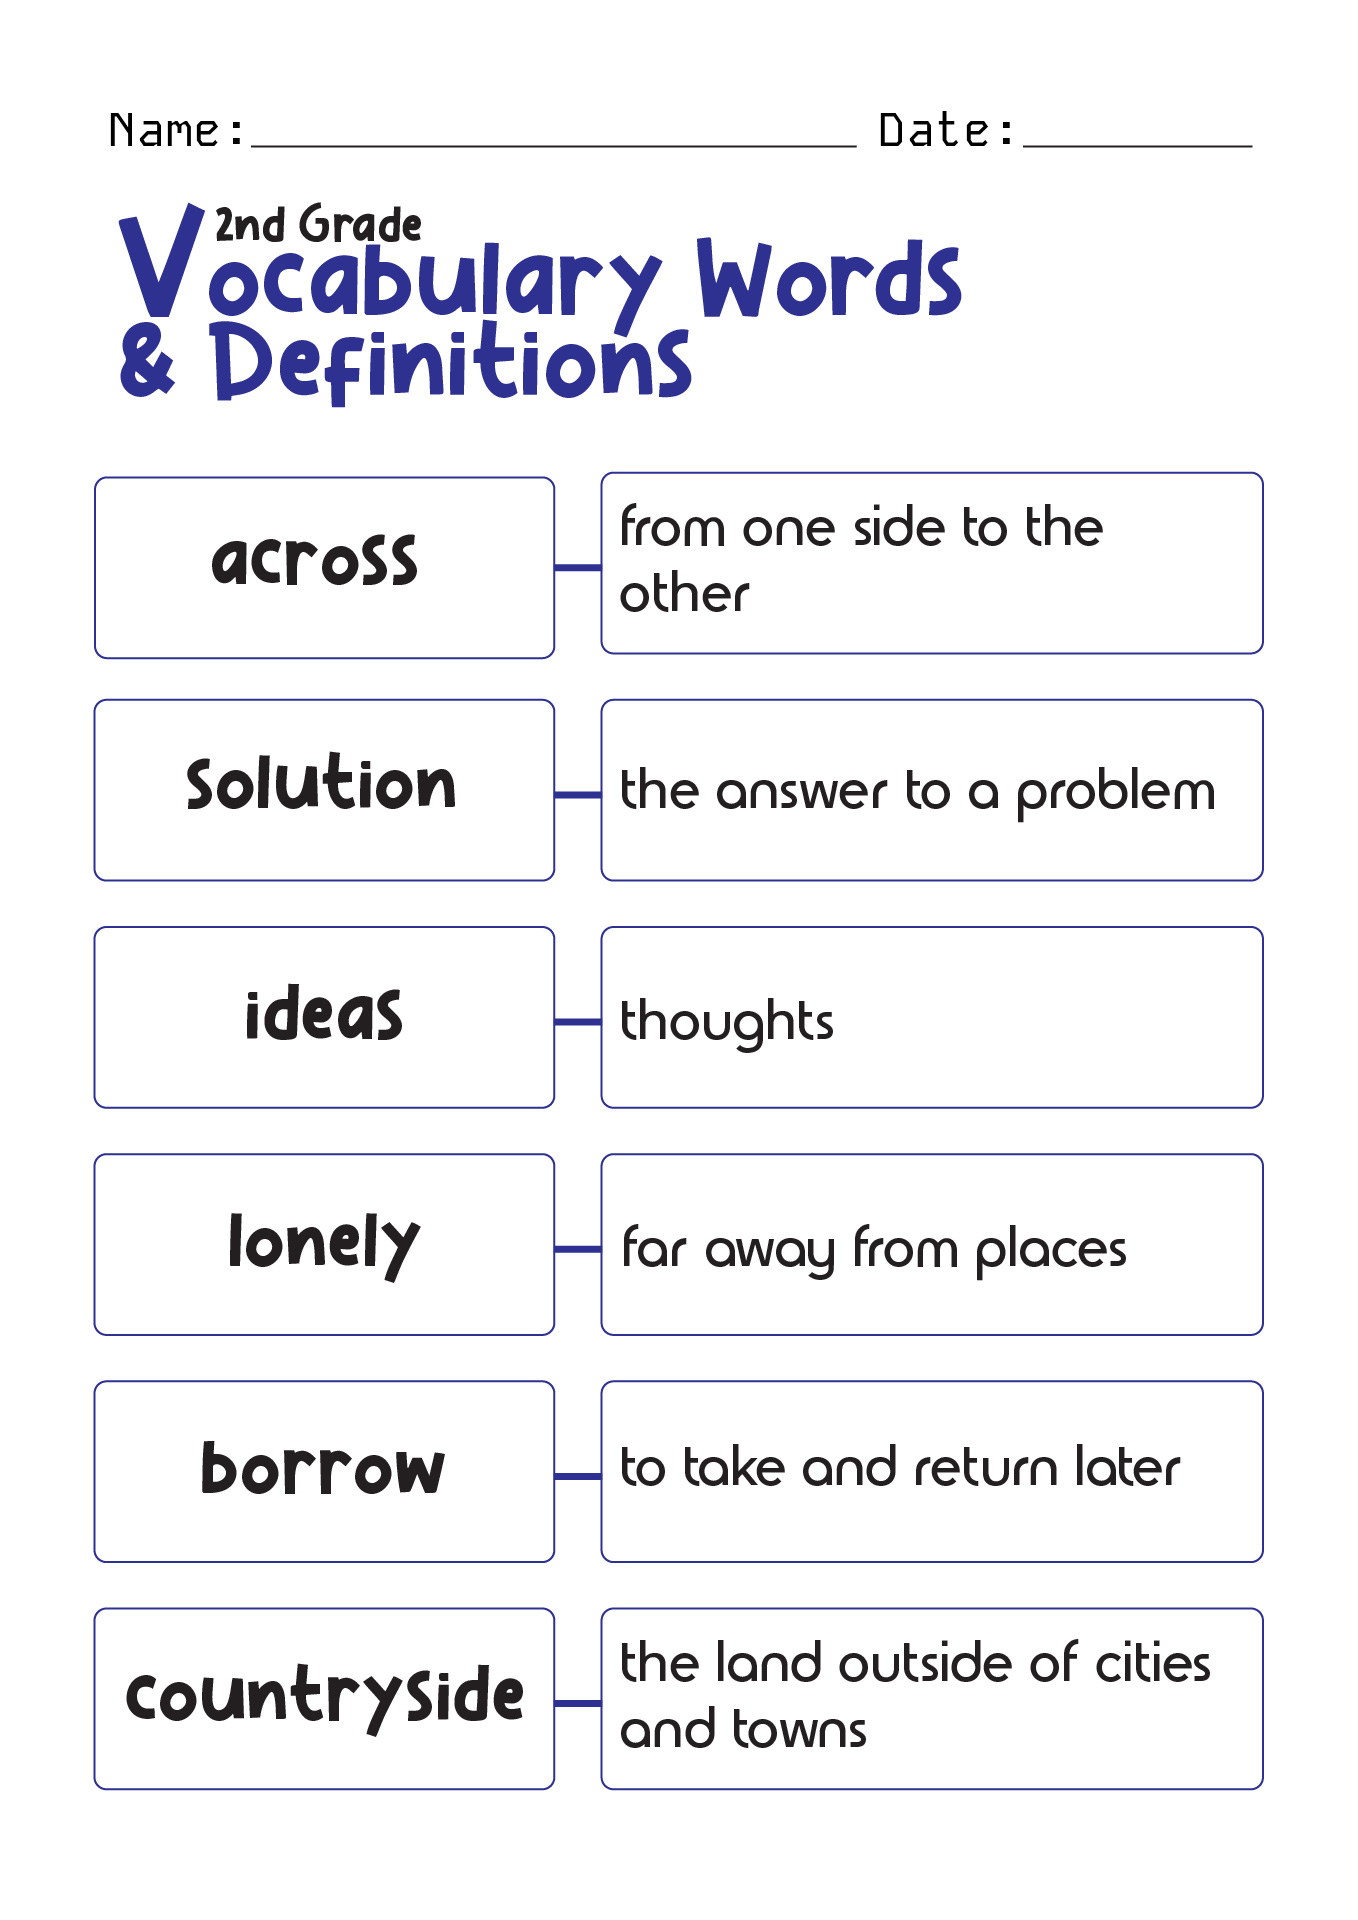 14-best-images-of-matching-definitions-to-words-worksheets-2nd-grade-vocabulary-words-and